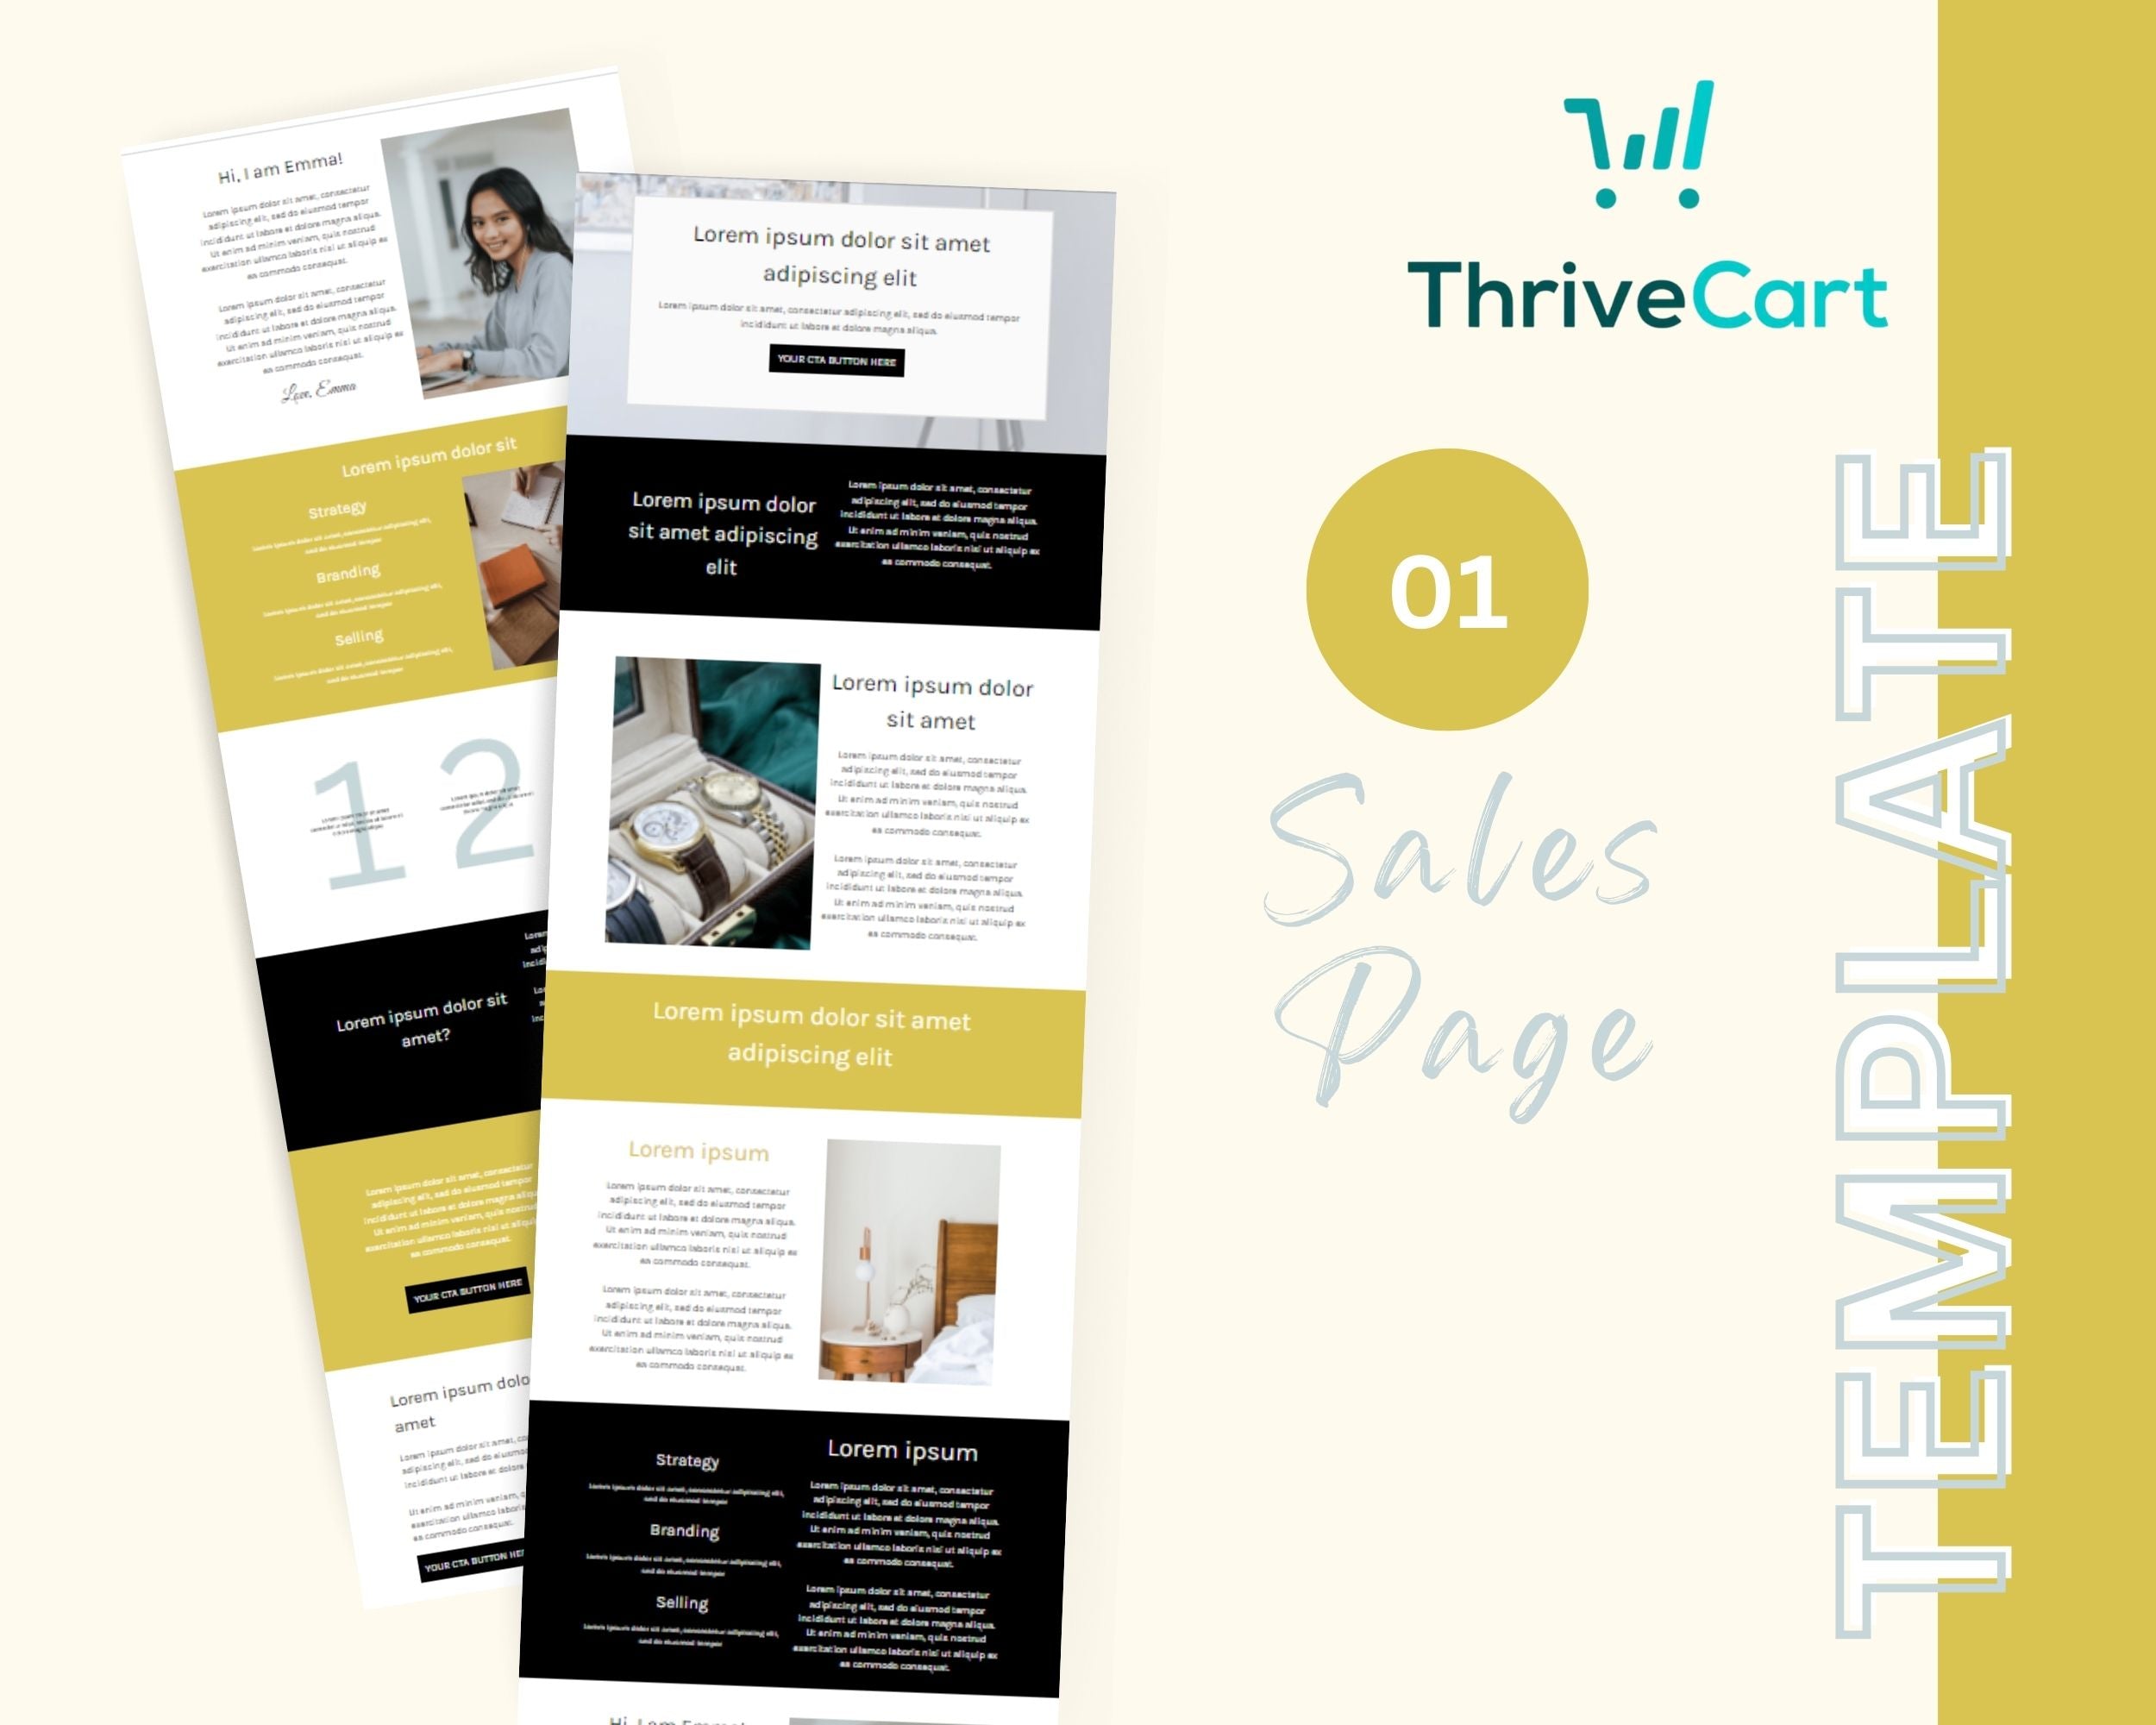 Black & Gold ThriveCart 4-Page Sales Funnel Template